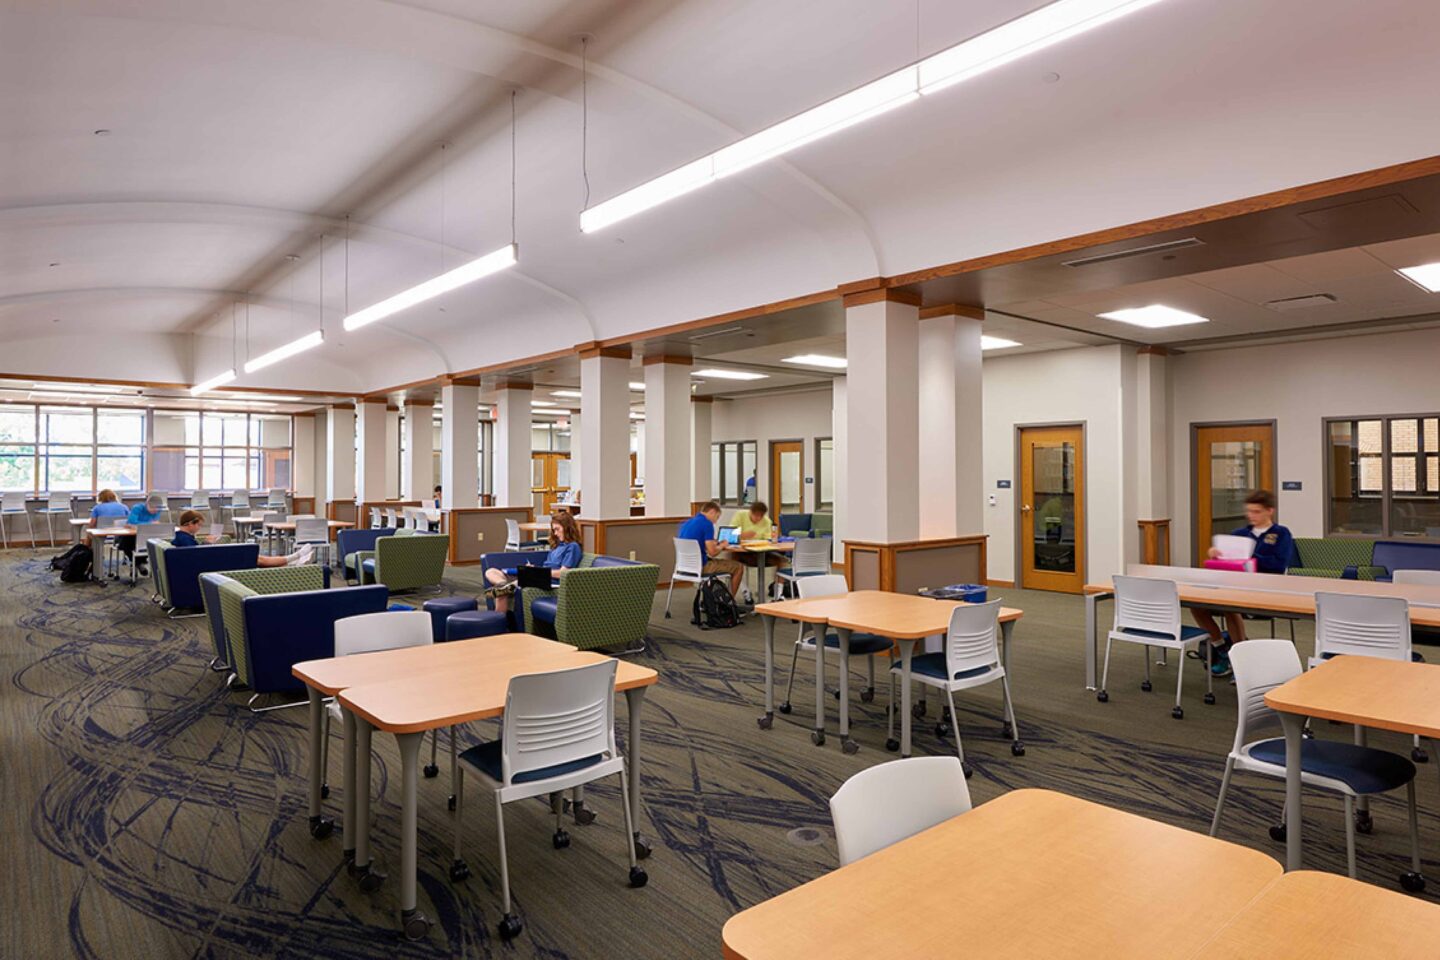 Students work under a barrel-vaulted ceiling in the school library